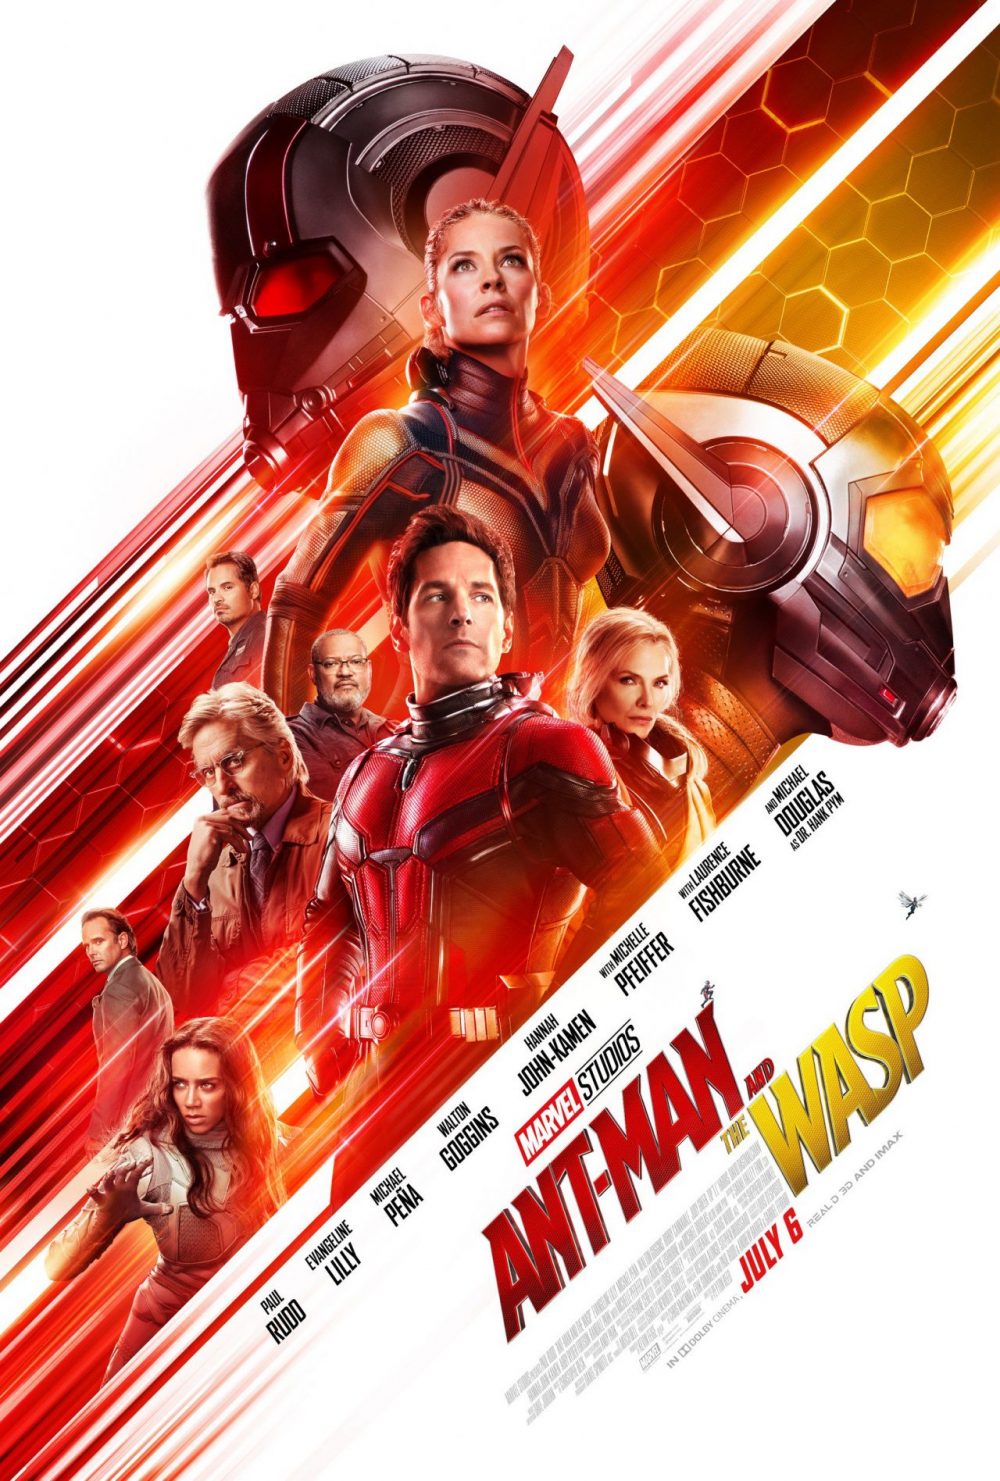 ant man and the wasp anh dai dien e1587653807956 - "Ant Man and the Wasp": Một thập kỷ thống trị điện ảnh của Marvel